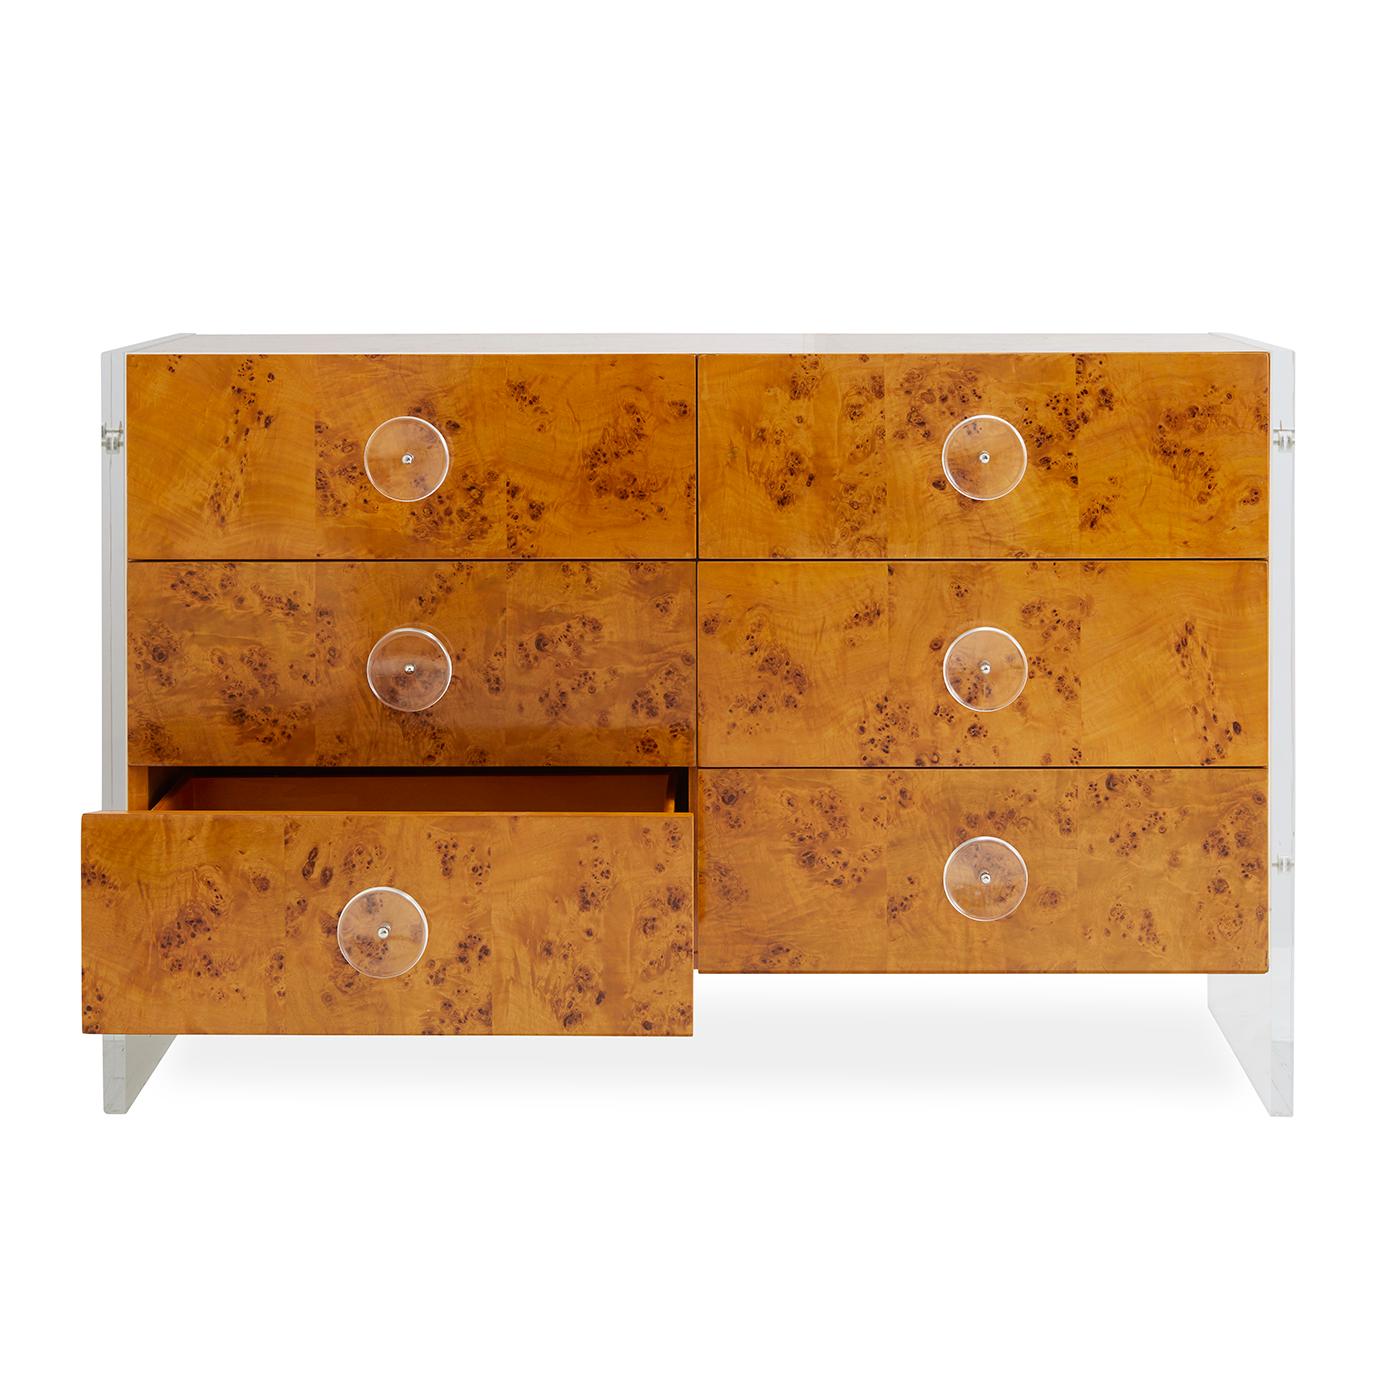 Timelessly Chic. From our chic burled wood collection—warm mappa wood floats between acrylic legs with stainless steel accents. Six generous drawers showcase naturally occurring patterns in the wood, while oversized acrylic pulls and soft-close